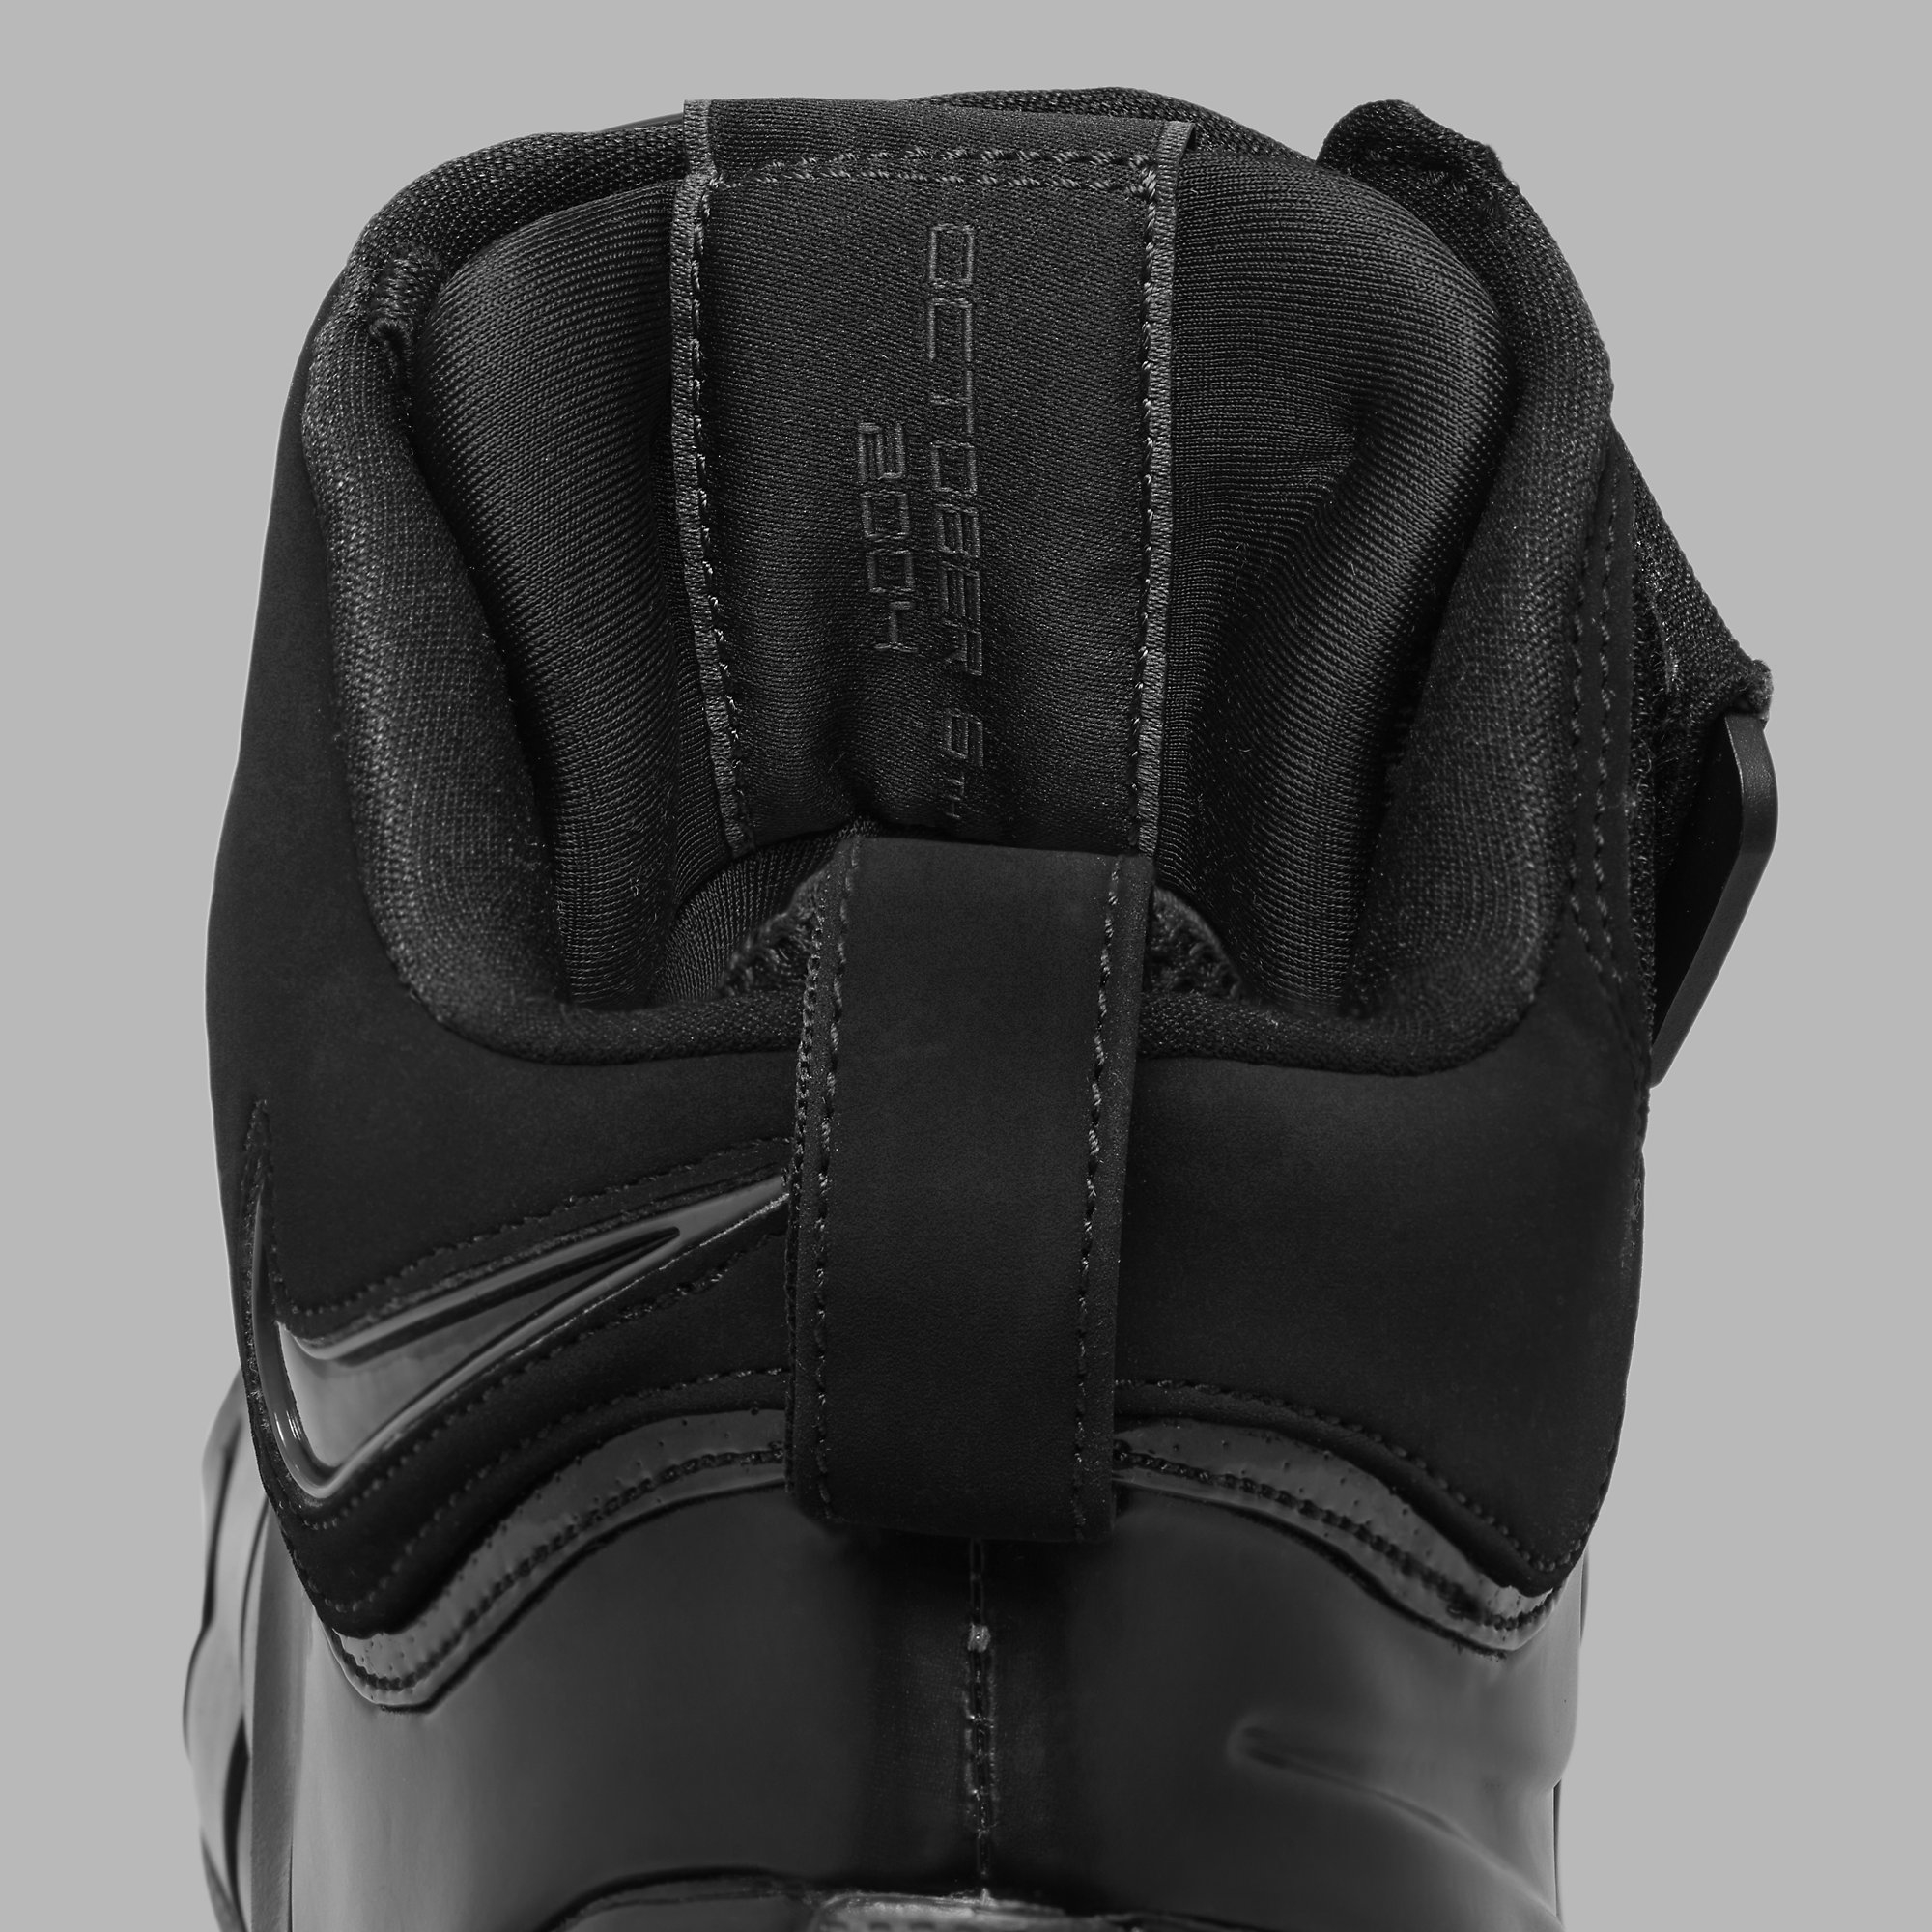 Nike LeBron 4 IV Anthracite Release Date DJ1597-001 Tongue Detail